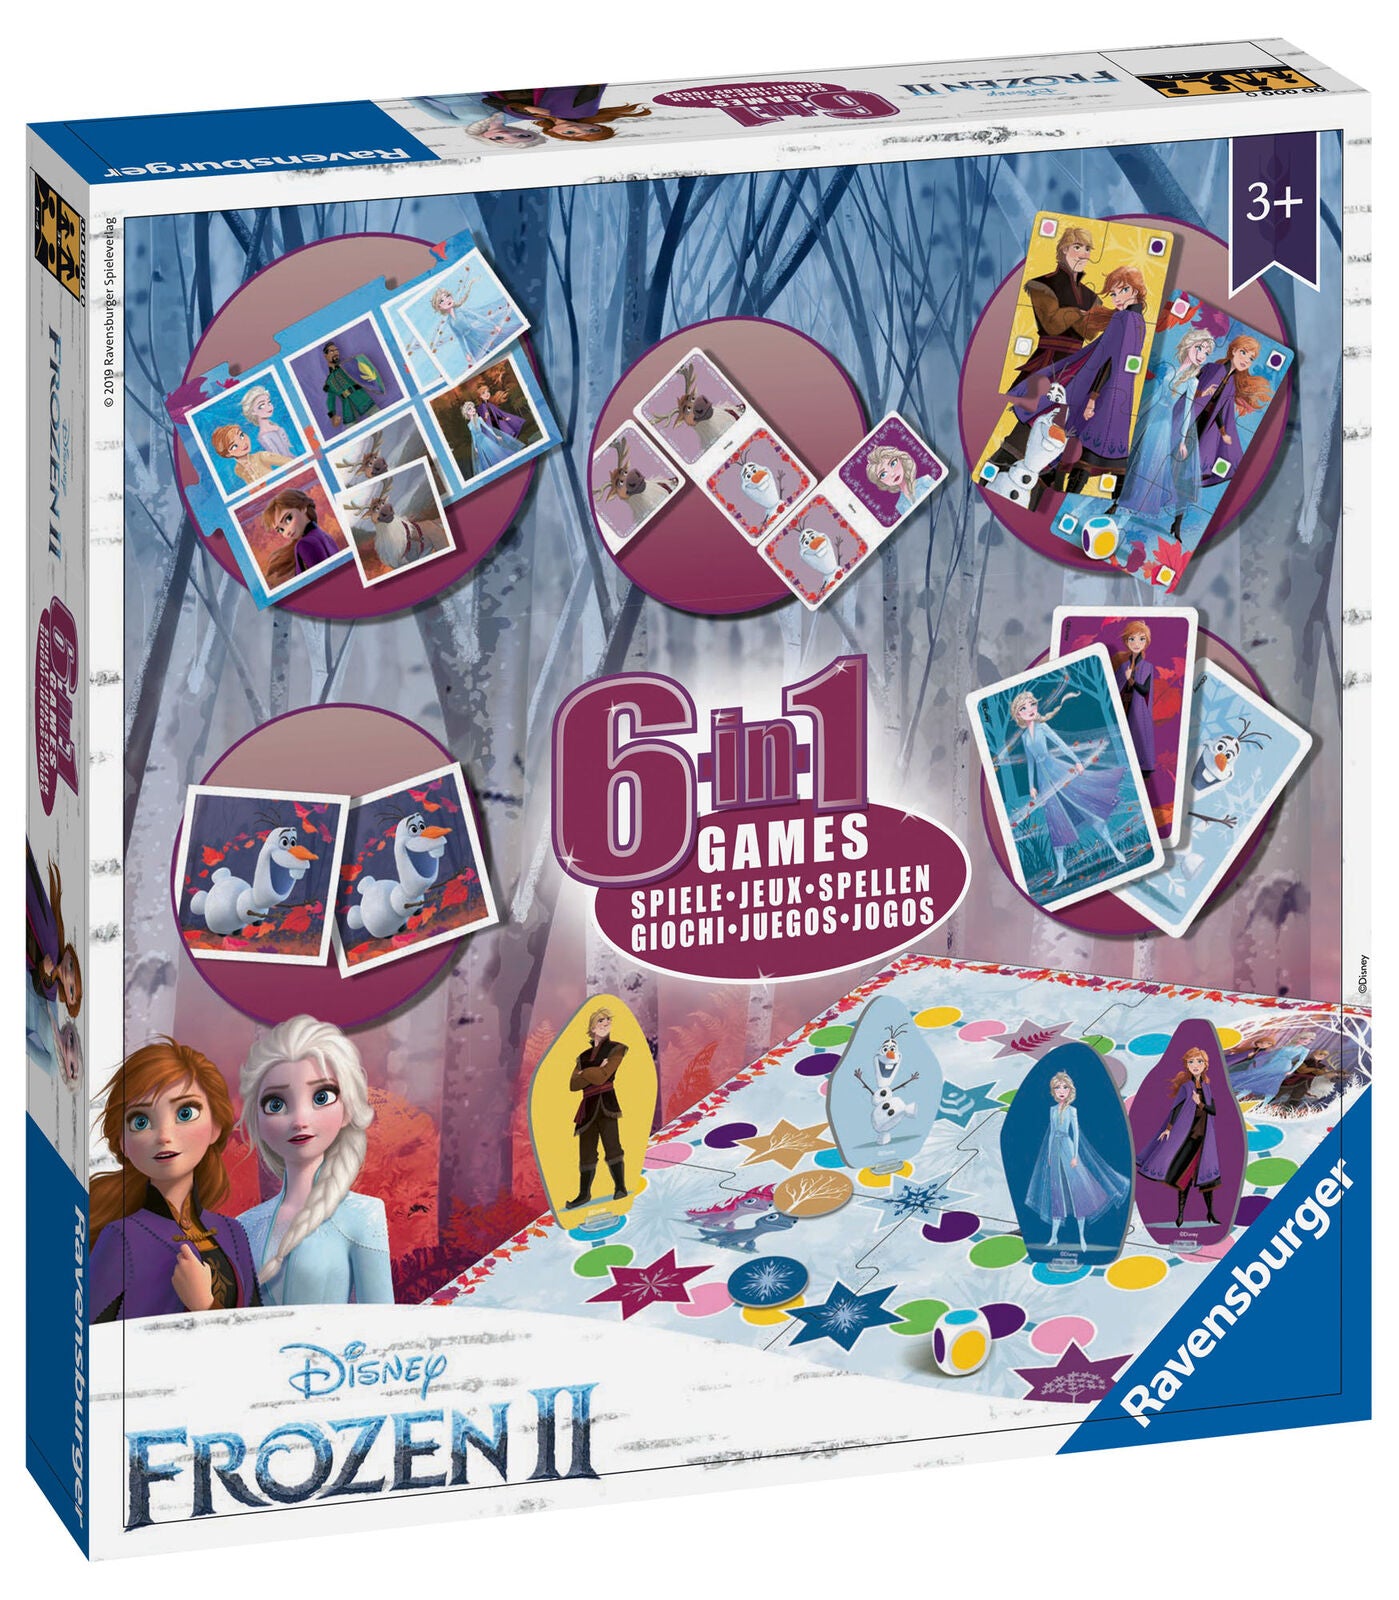 20427 Ravensburger Disney Frozen 2 6-in-1 Board Games Box Suitable for ages 3+